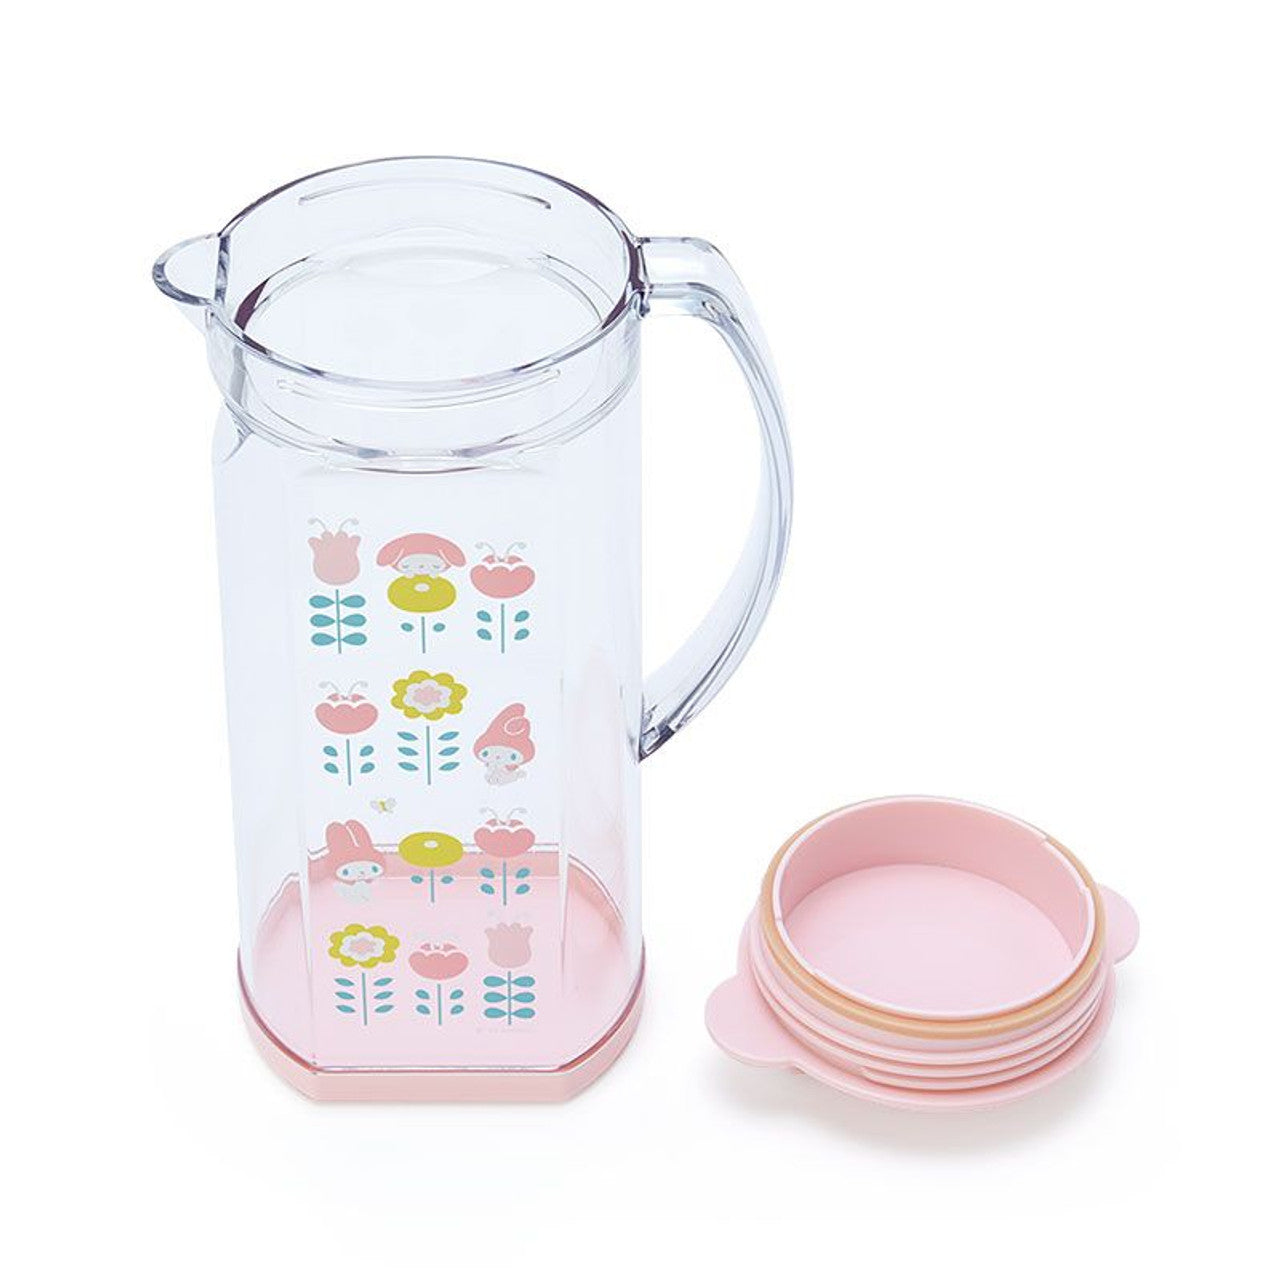 My Melody Acrylic Water Pitcher (Retro Tableware Series) Home Goods Japan Original   